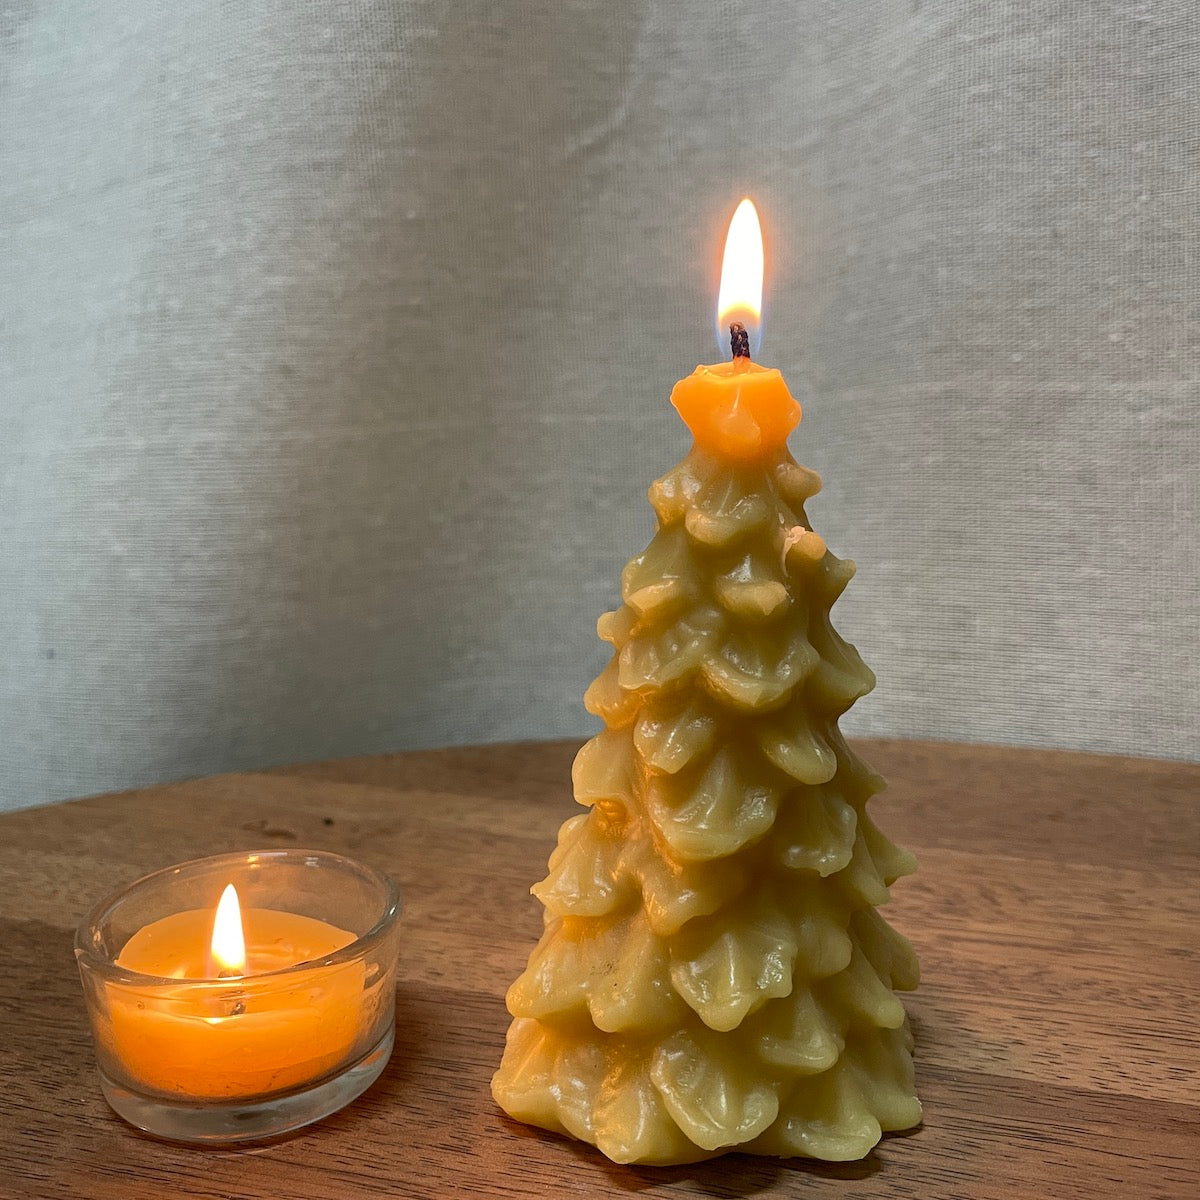 Medium Beeswax Christmas tree candle from Happy Flame